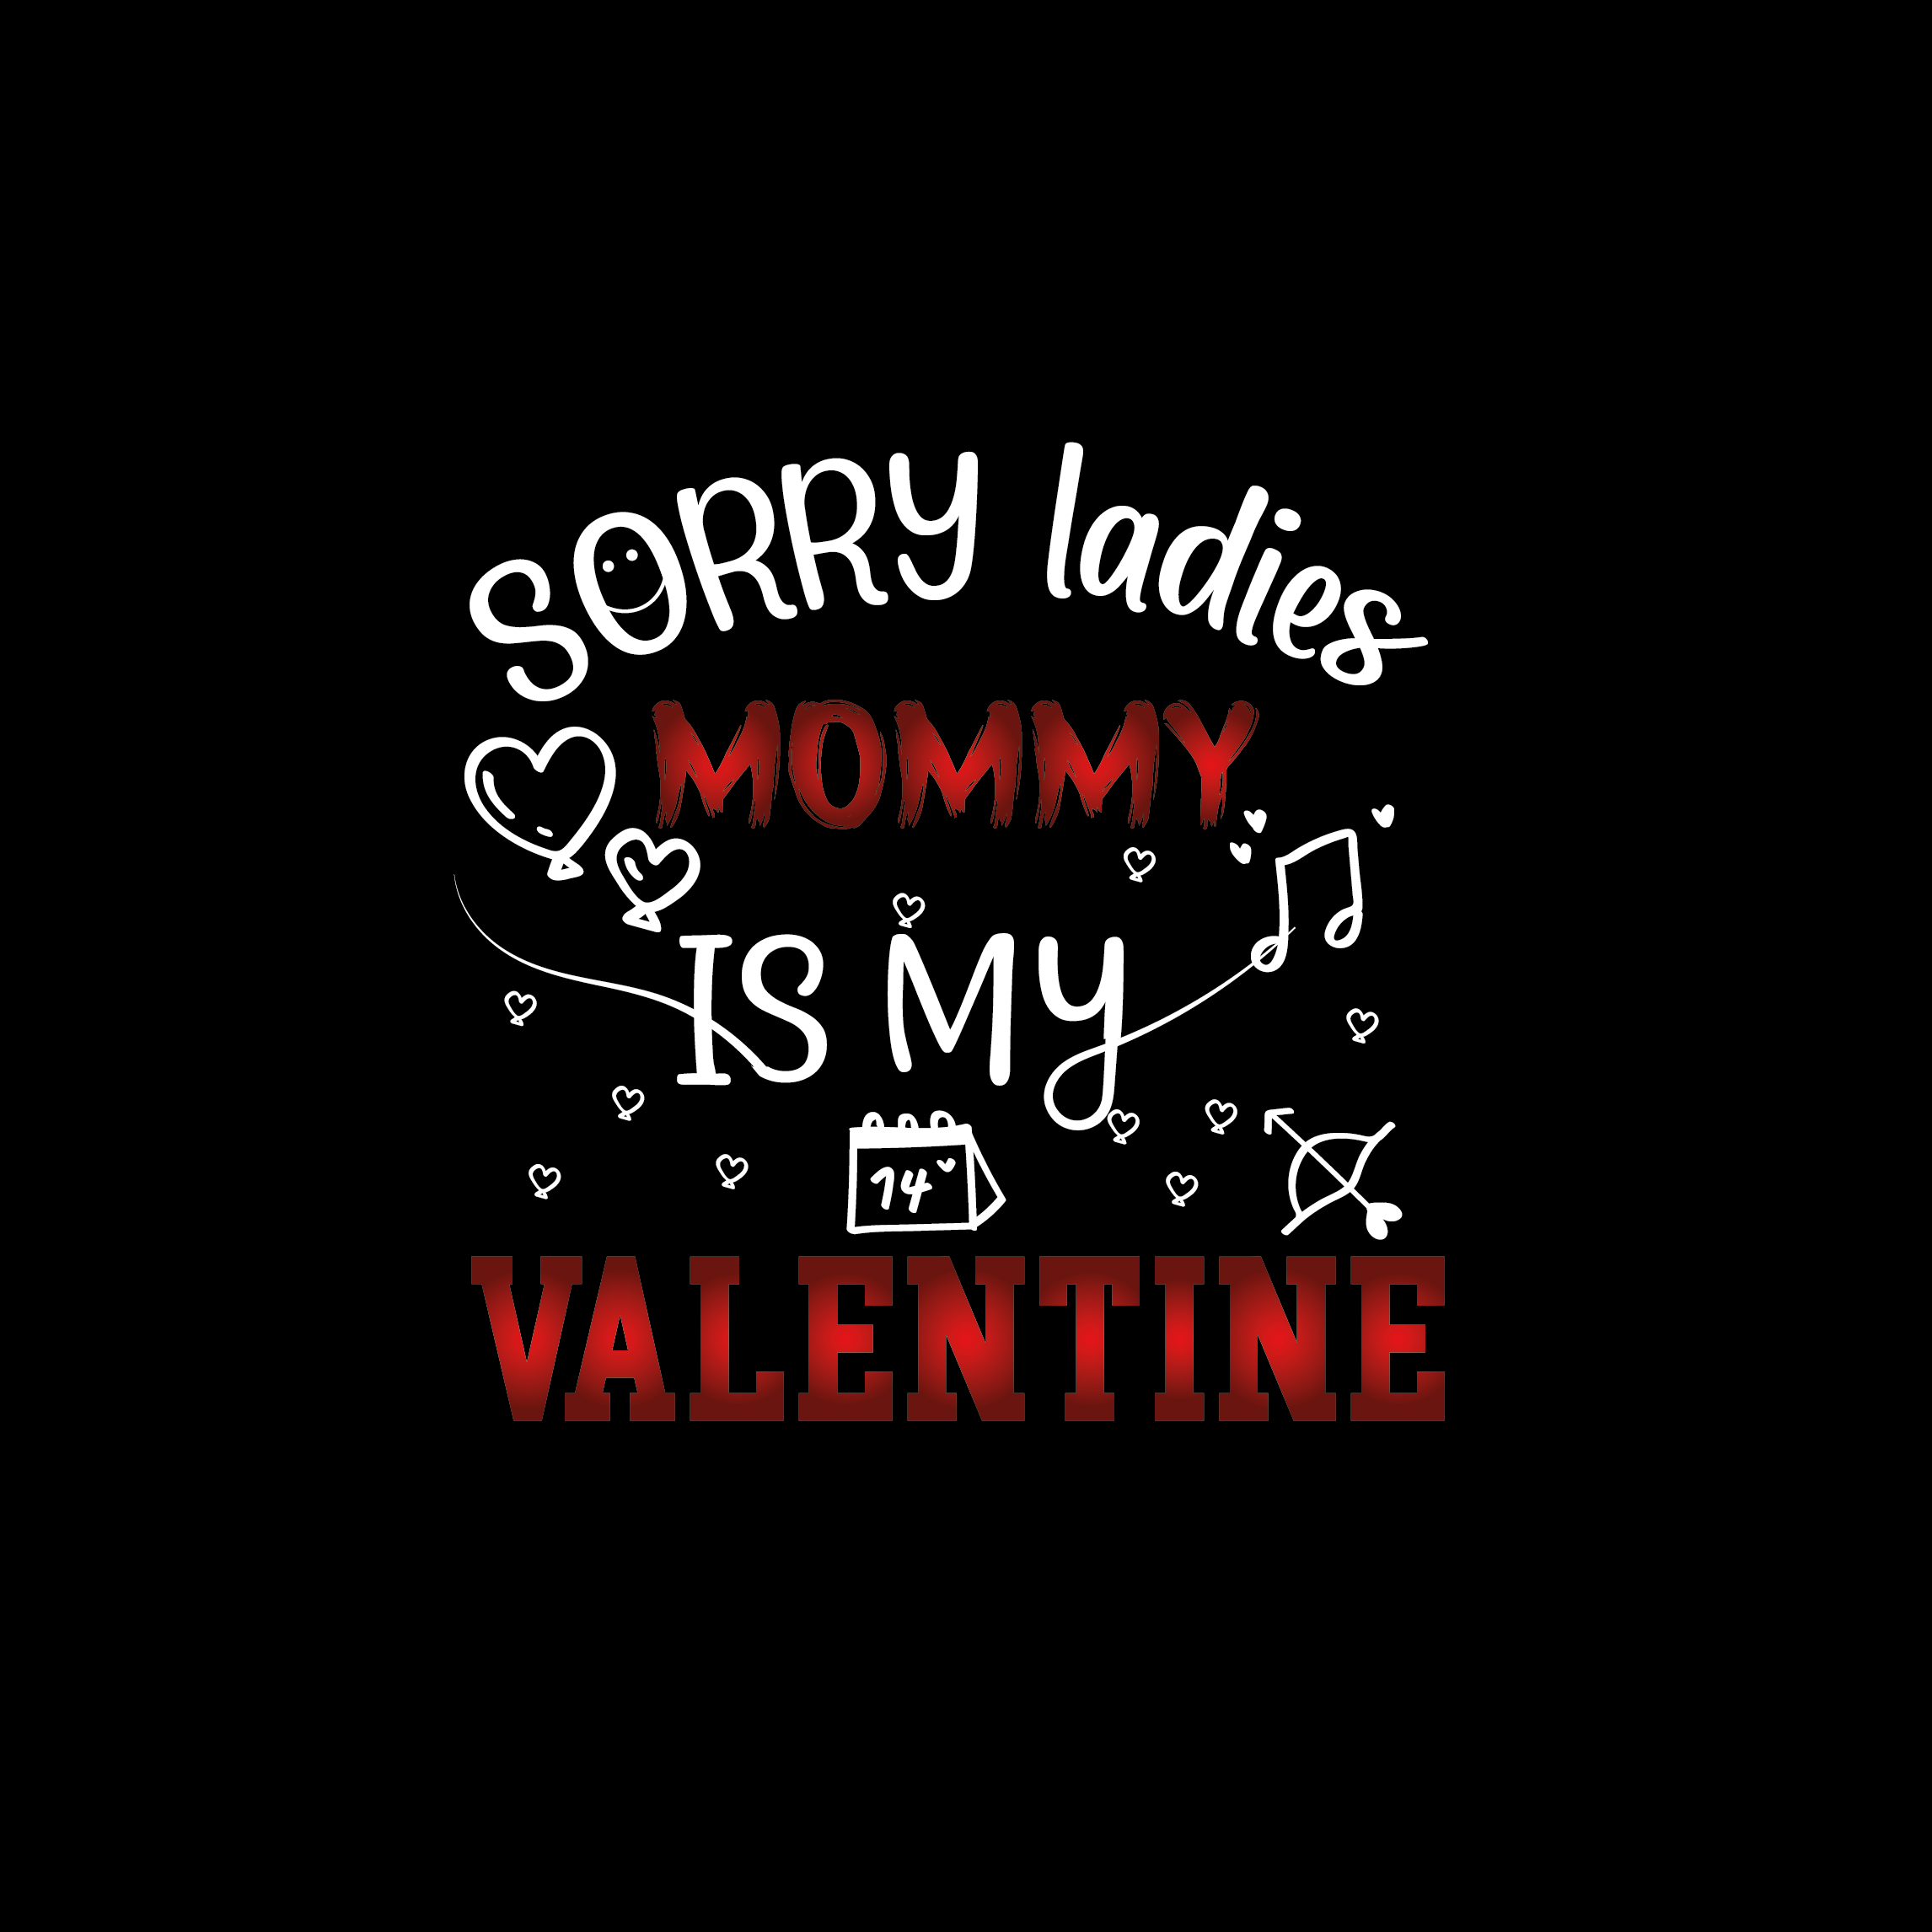 Valentines Day T-Shirt design sorry ladies mommy is my valentine best-selling typography vector t-shirt design fully editable and printable preview image.